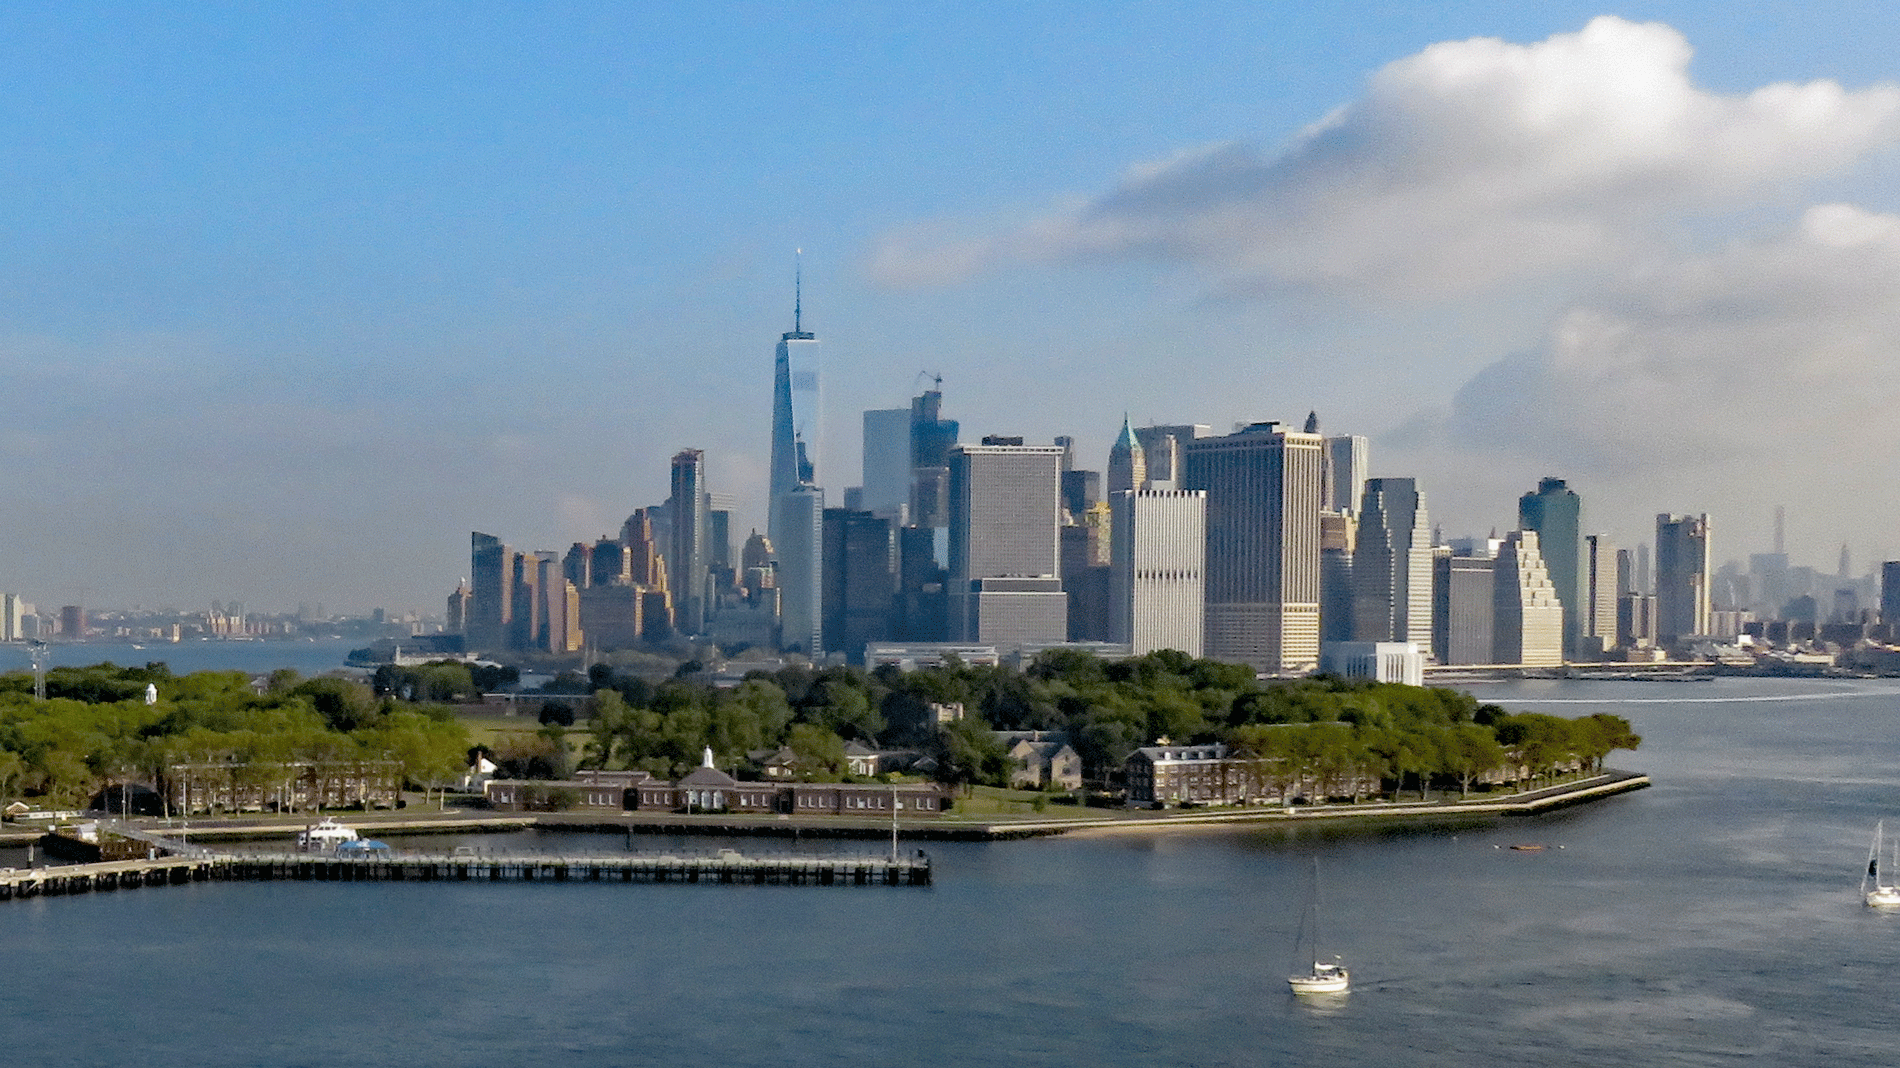 Day 10, Arriving in NYC at the Red Hook Cruise Terminal in Brooklyn